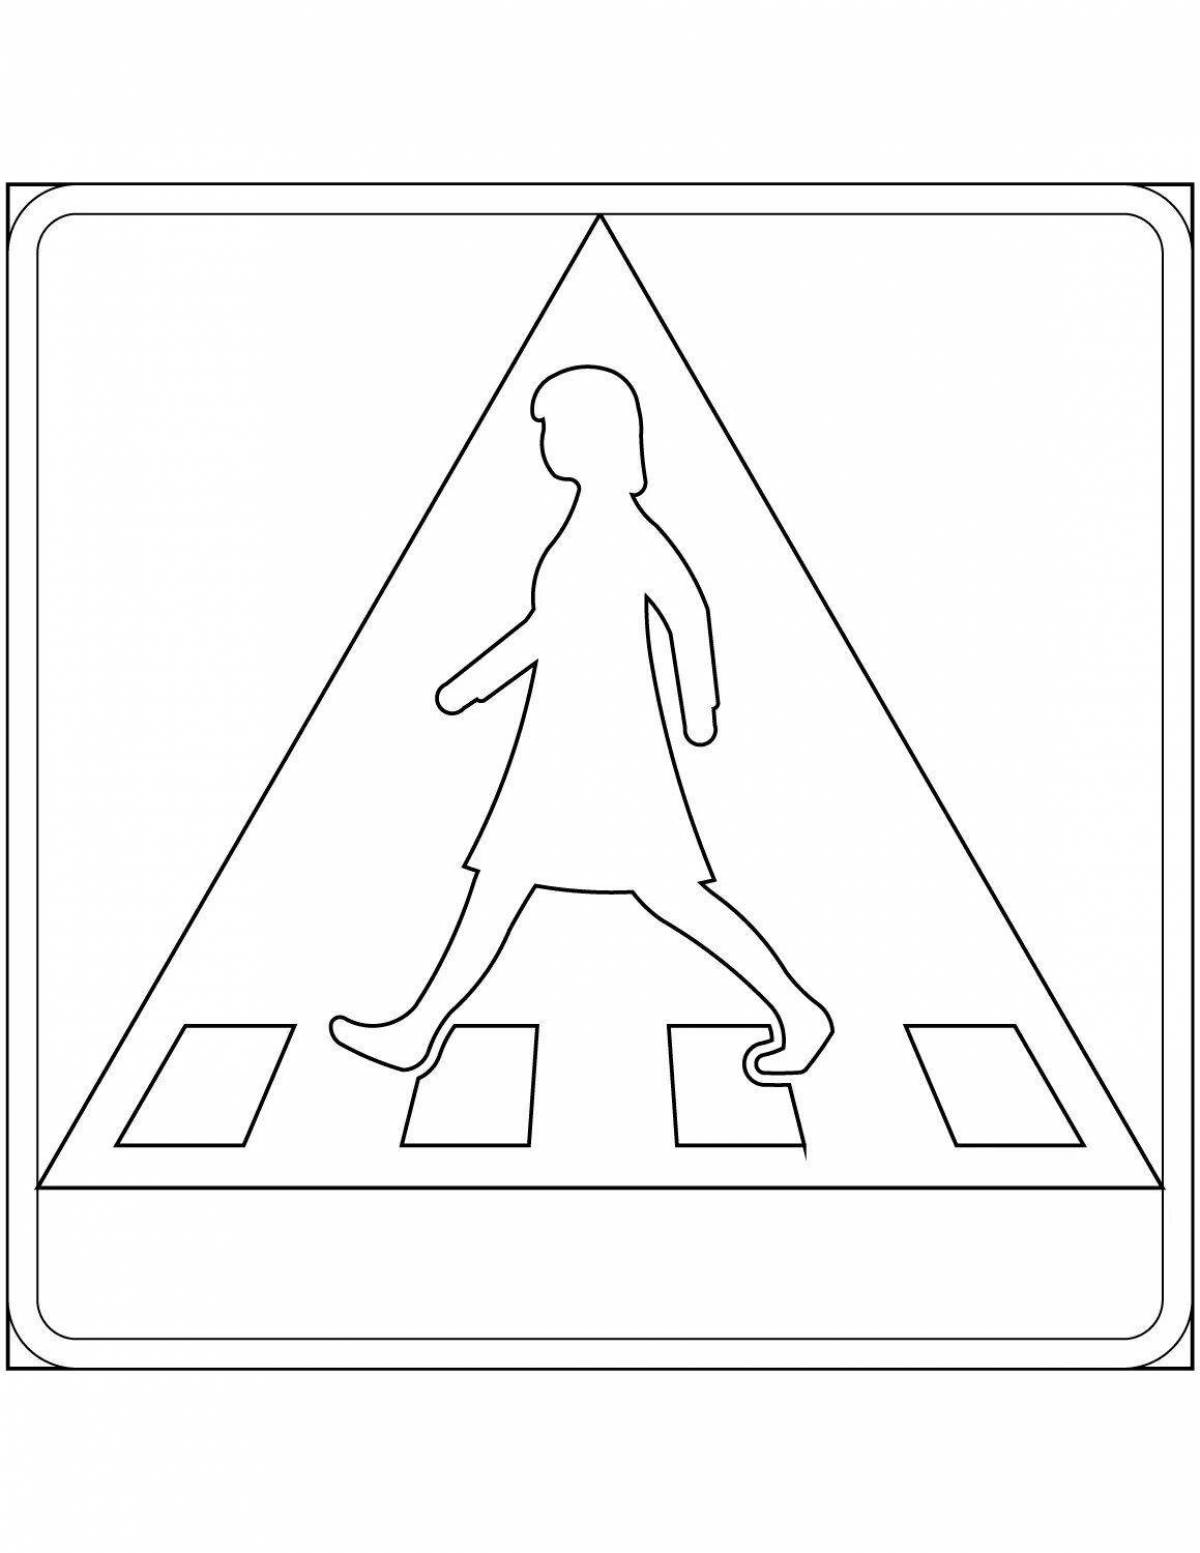 Coloring page calm pedestrian crossing road sign